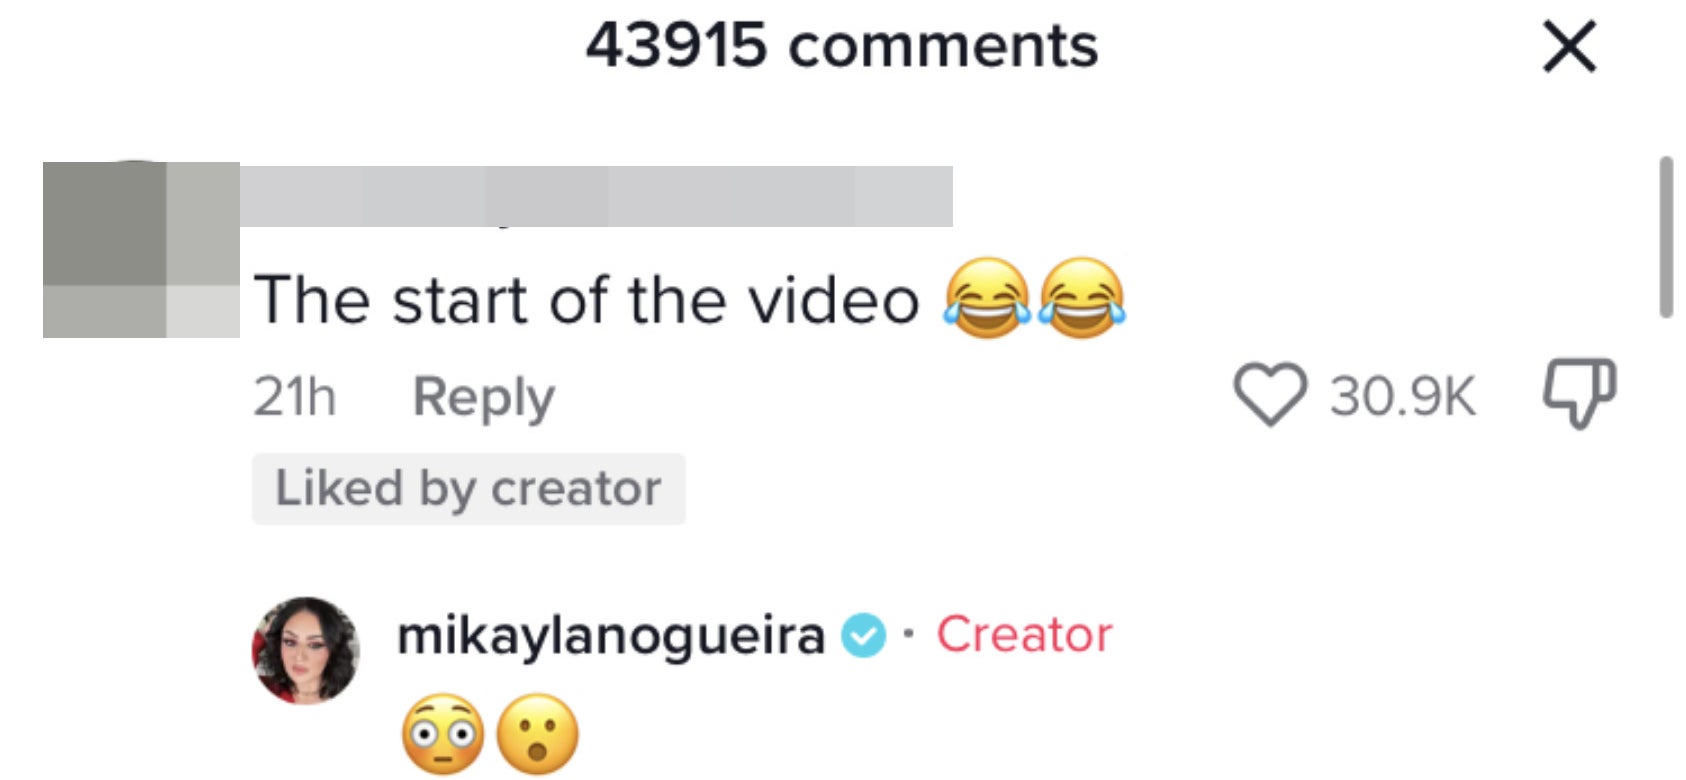 Someone in the comments said &quot;The start of the video [two laughing, crying emojis] to which Mikayla responded with a wide-eyed emoji